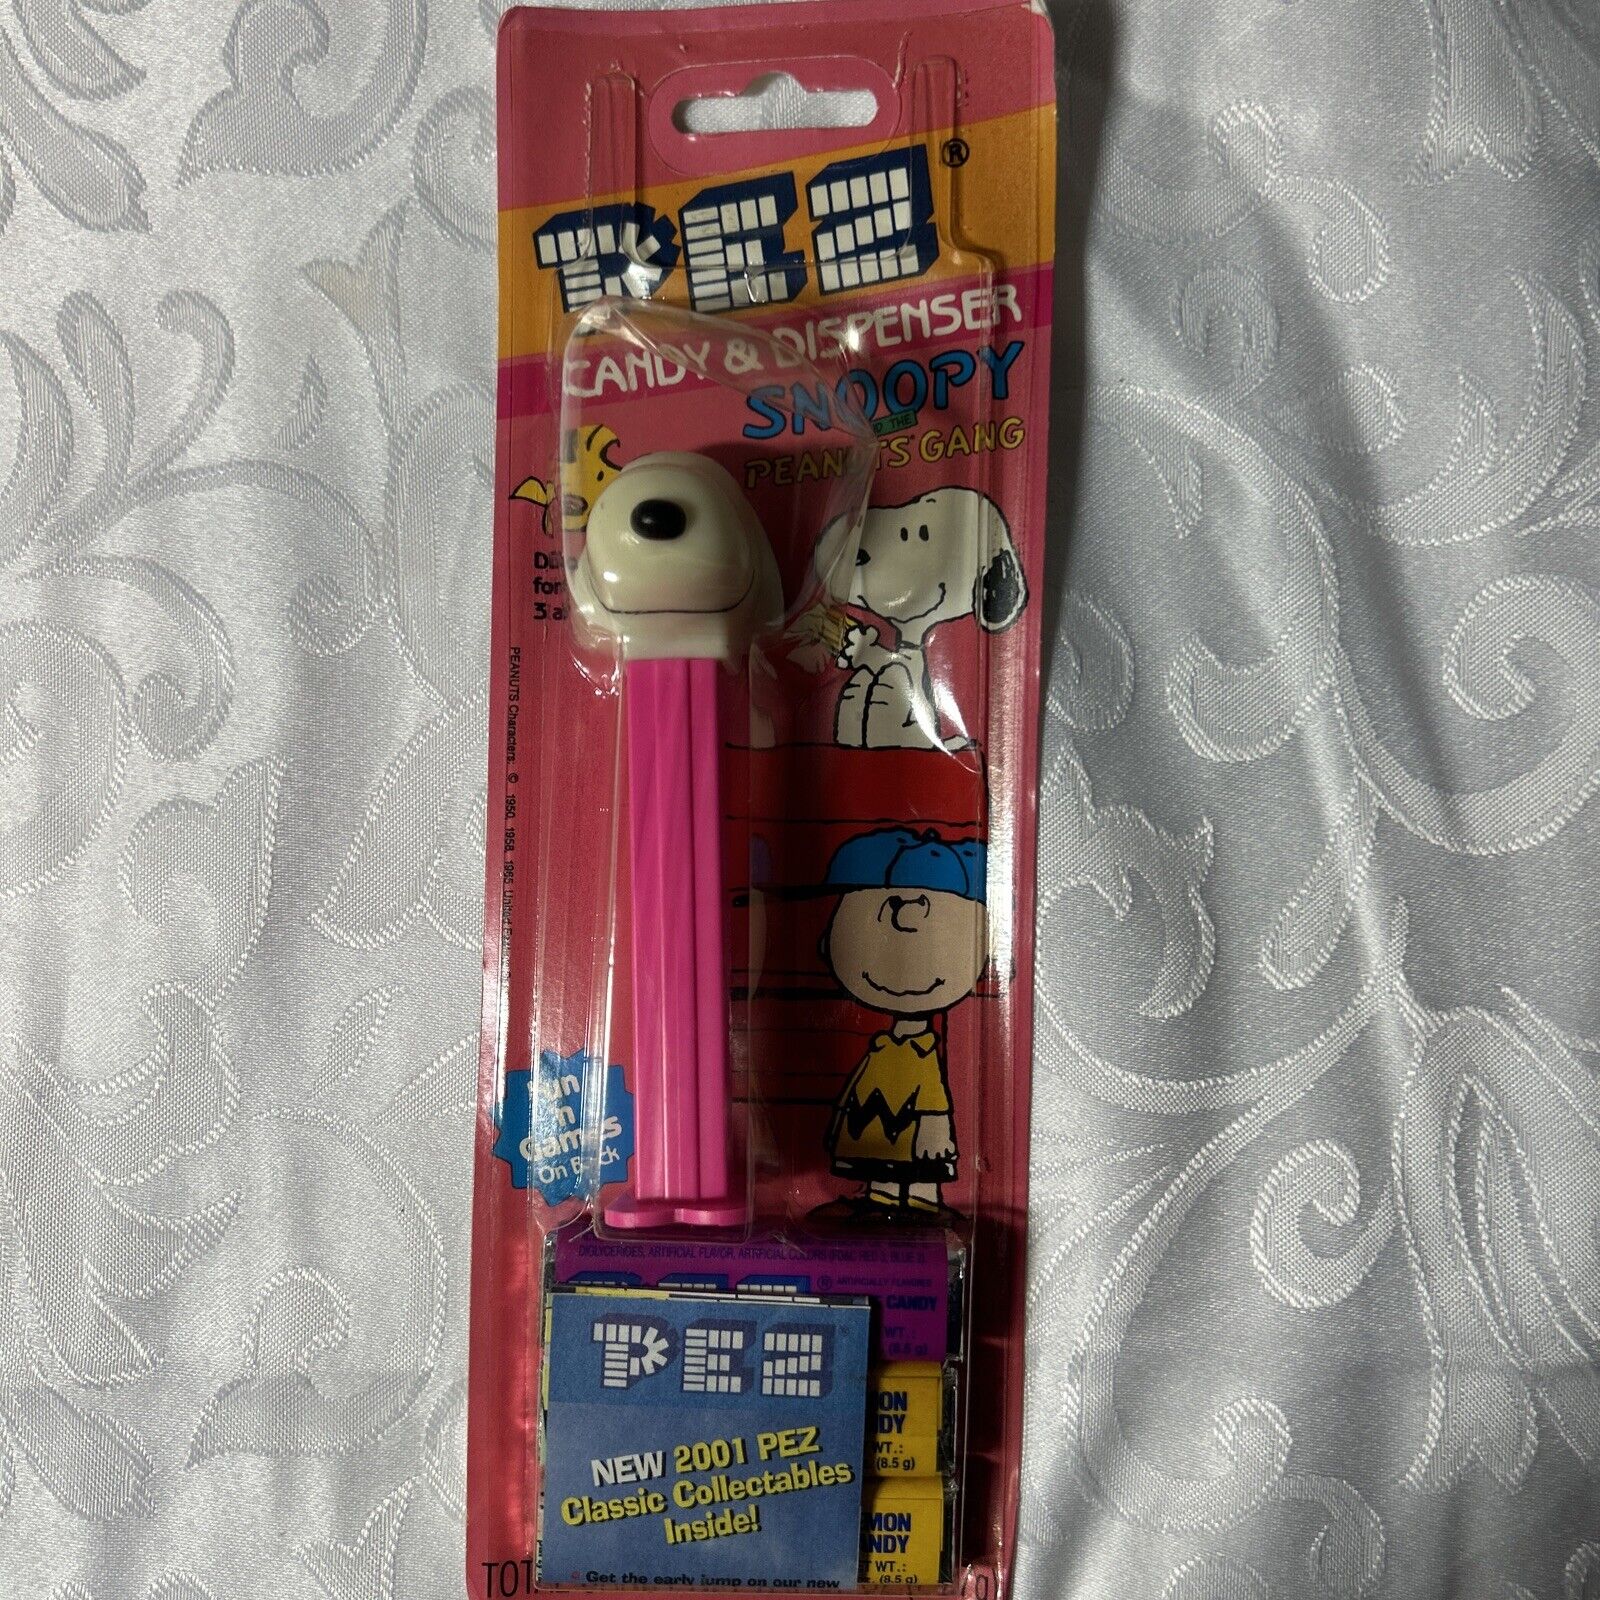 vtg 1985 Pez Snoopy and the peanuts gang Snoopy candy dispenser